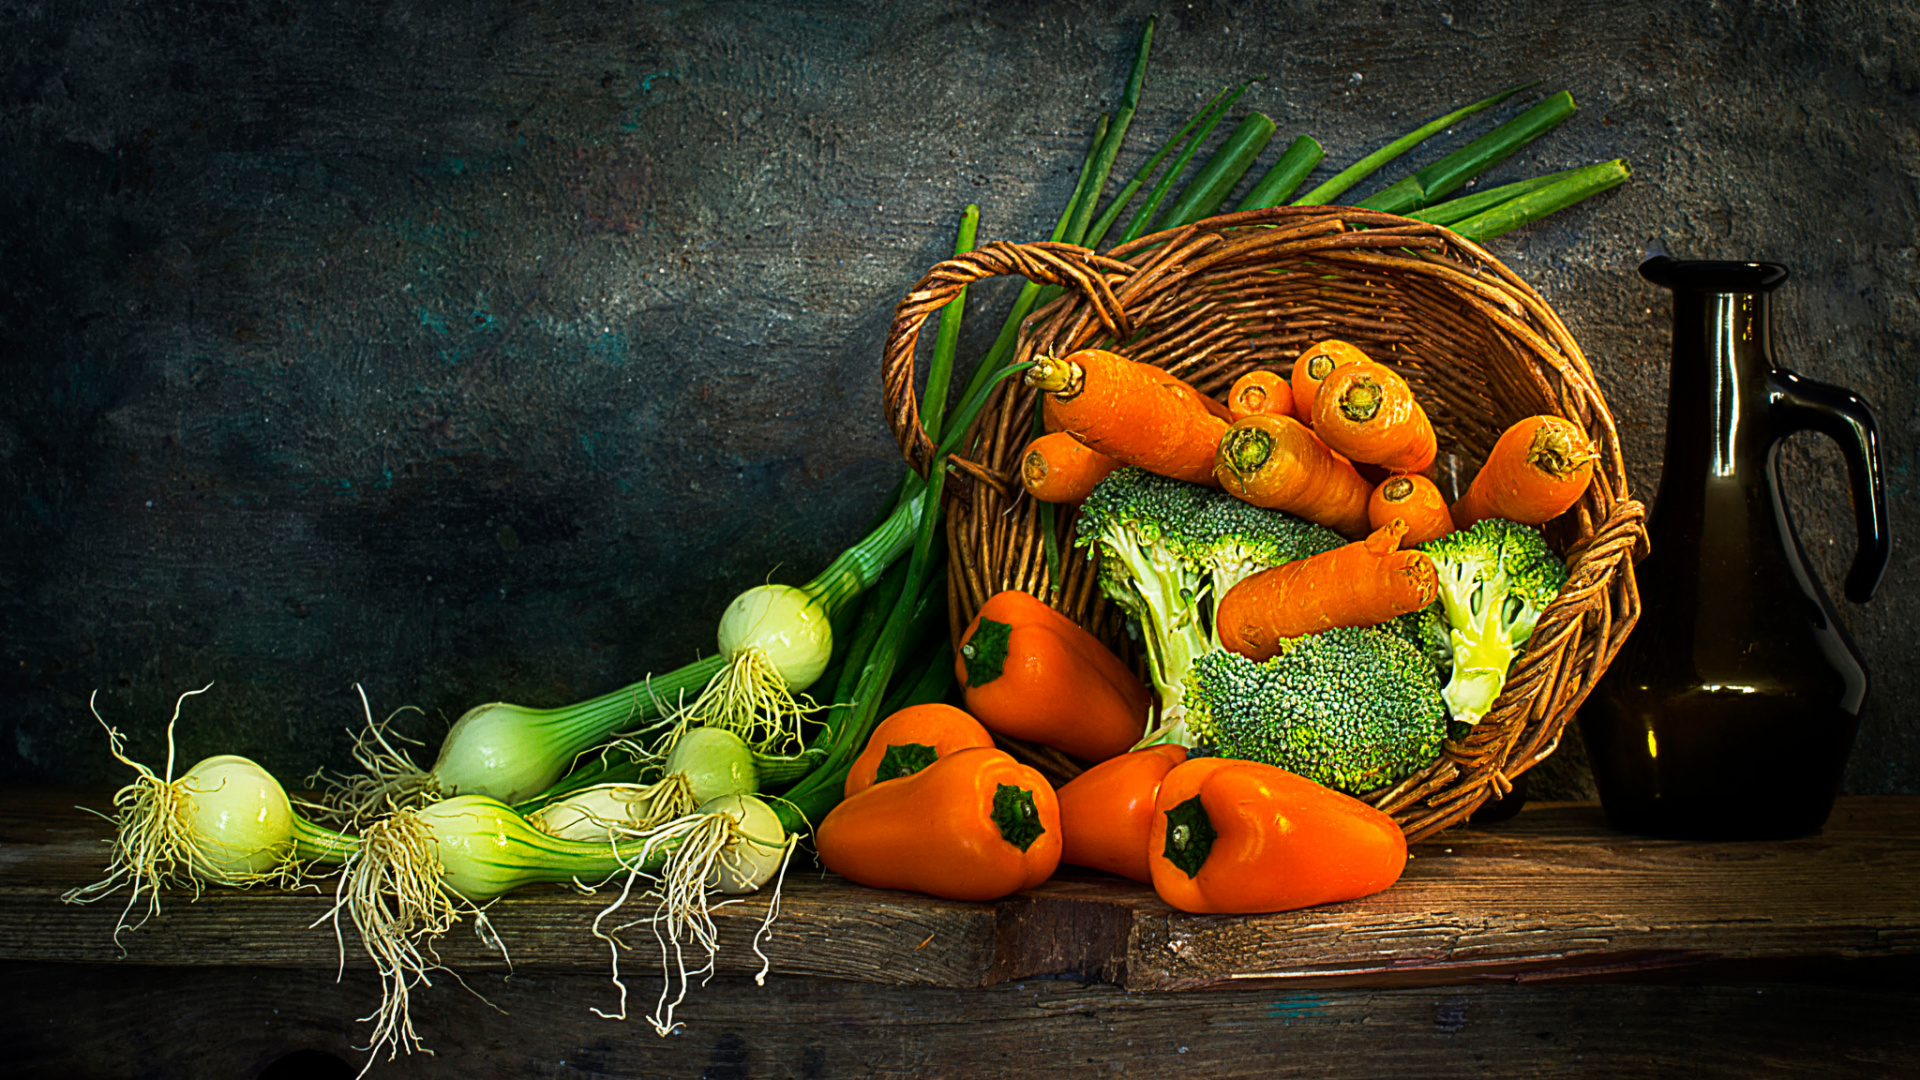 Orange Carrots and Green Chili on Brown Wooden Table. Wallpaper in 1920x1080 Resolution